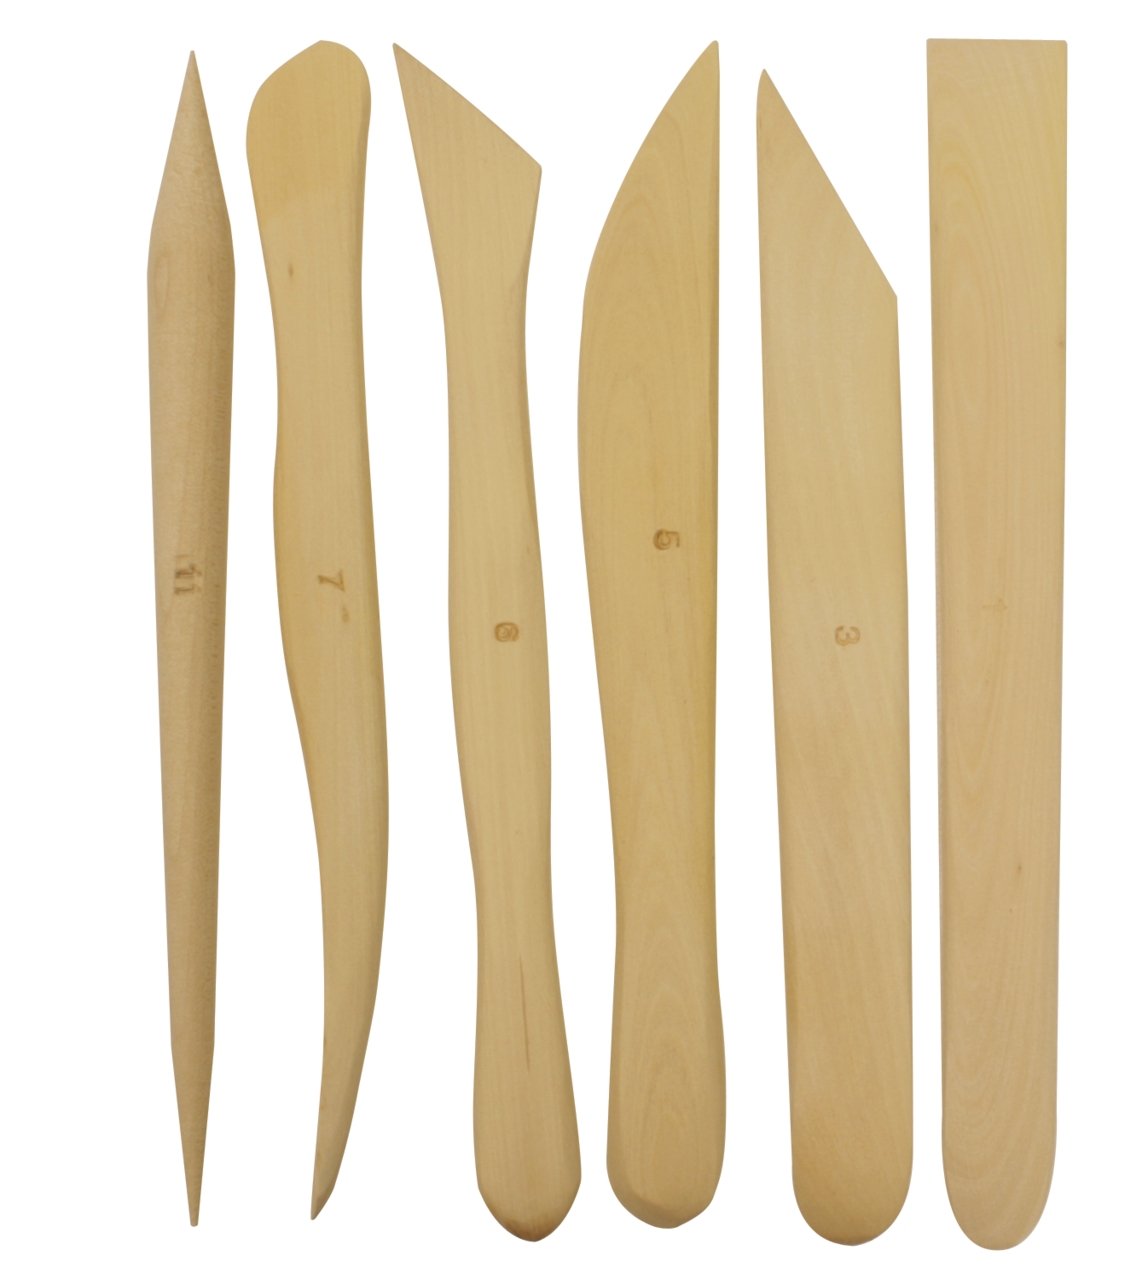 Boxwood Modeling Tools 6 inch - Set of 6 - merriartist.com